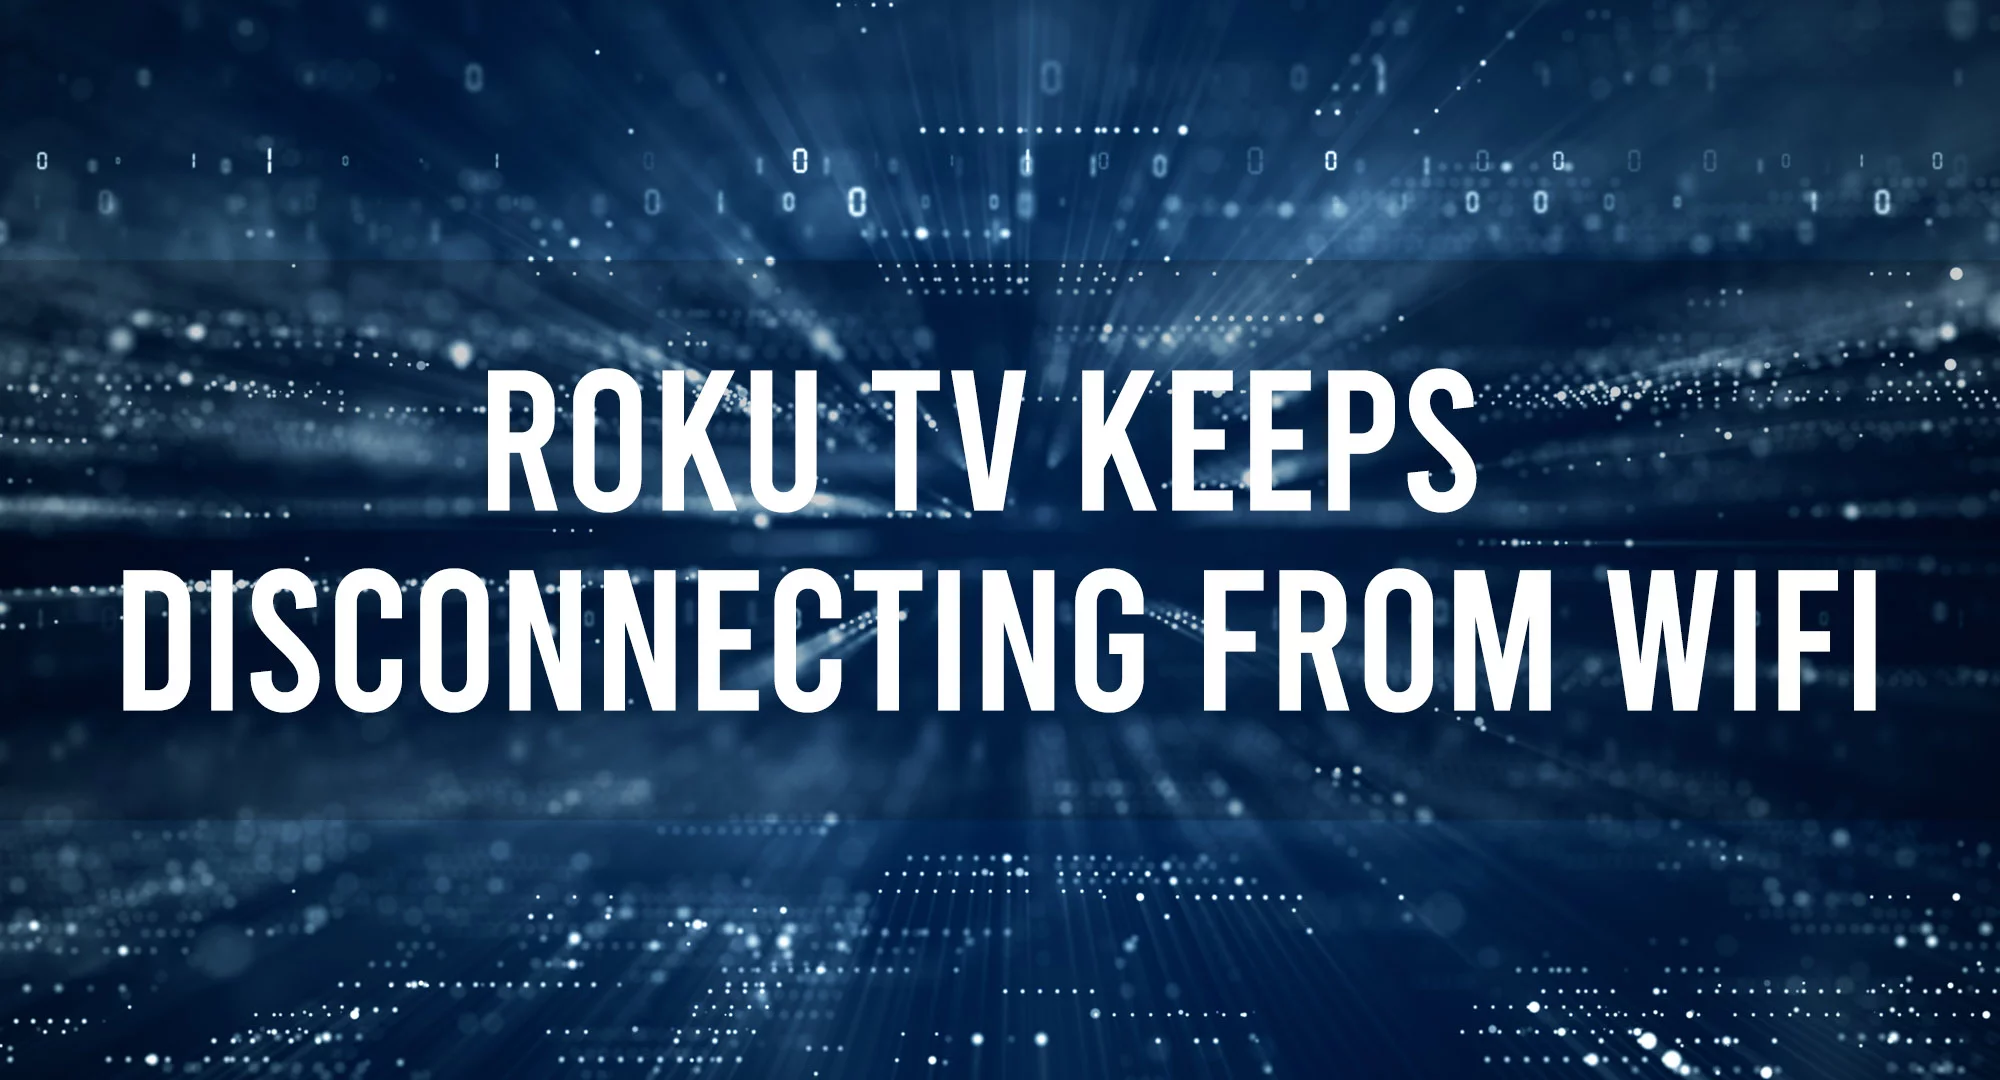 Roku Keeps Disconnecting From WiFi